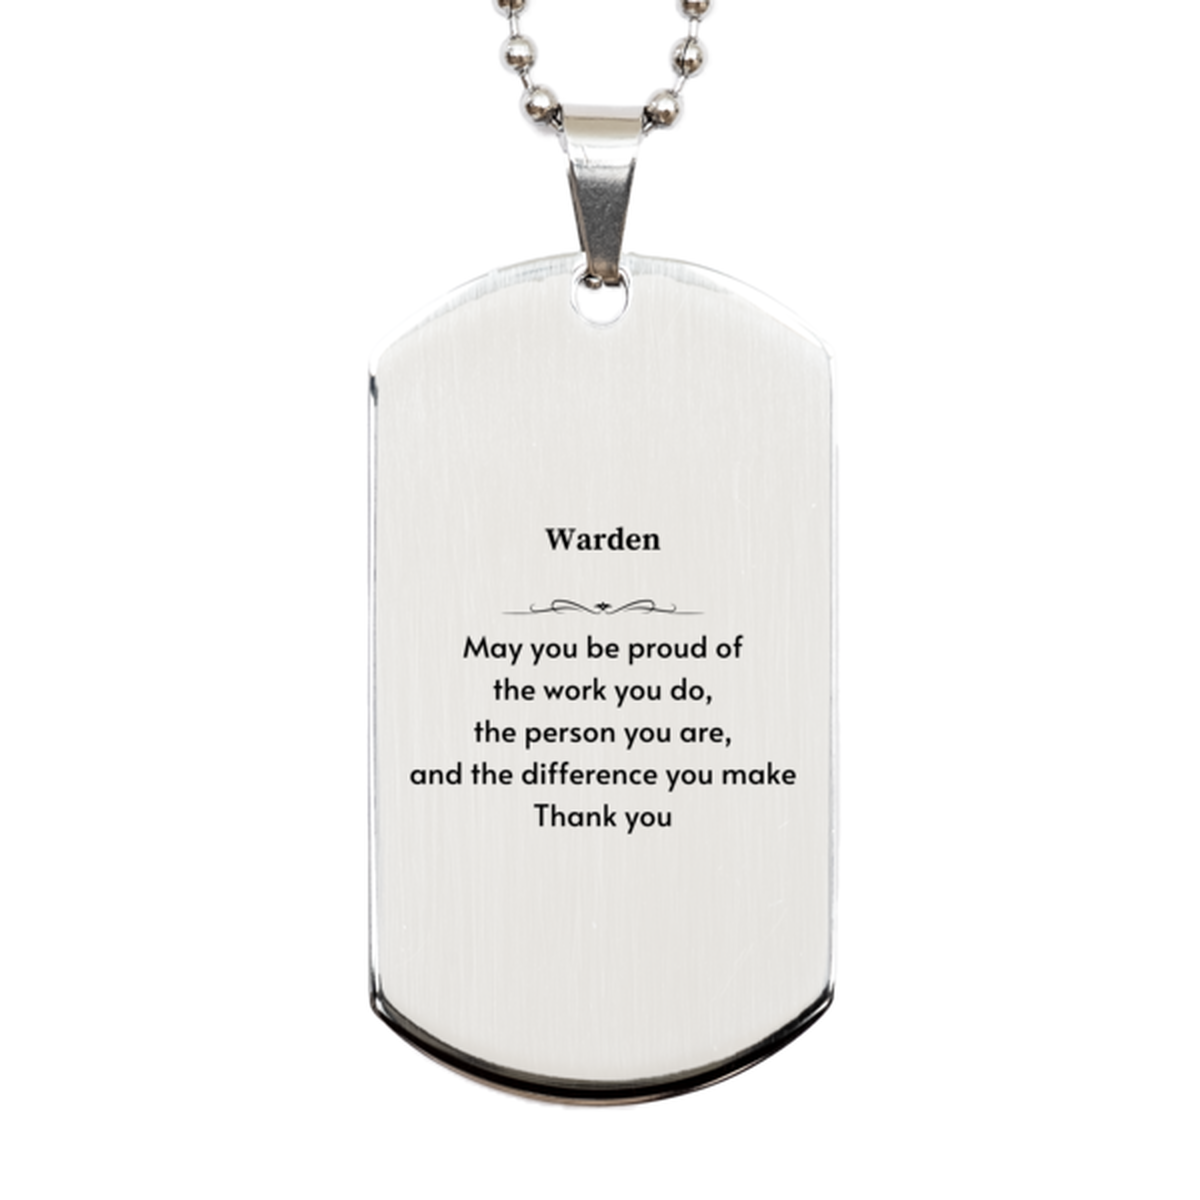 Heartwarming Silver Dog Tag Retirement Coworkers Gifts for Warden, Warden May You be proud of the work you do, the person you are Gifts for Boss Men Women Friends